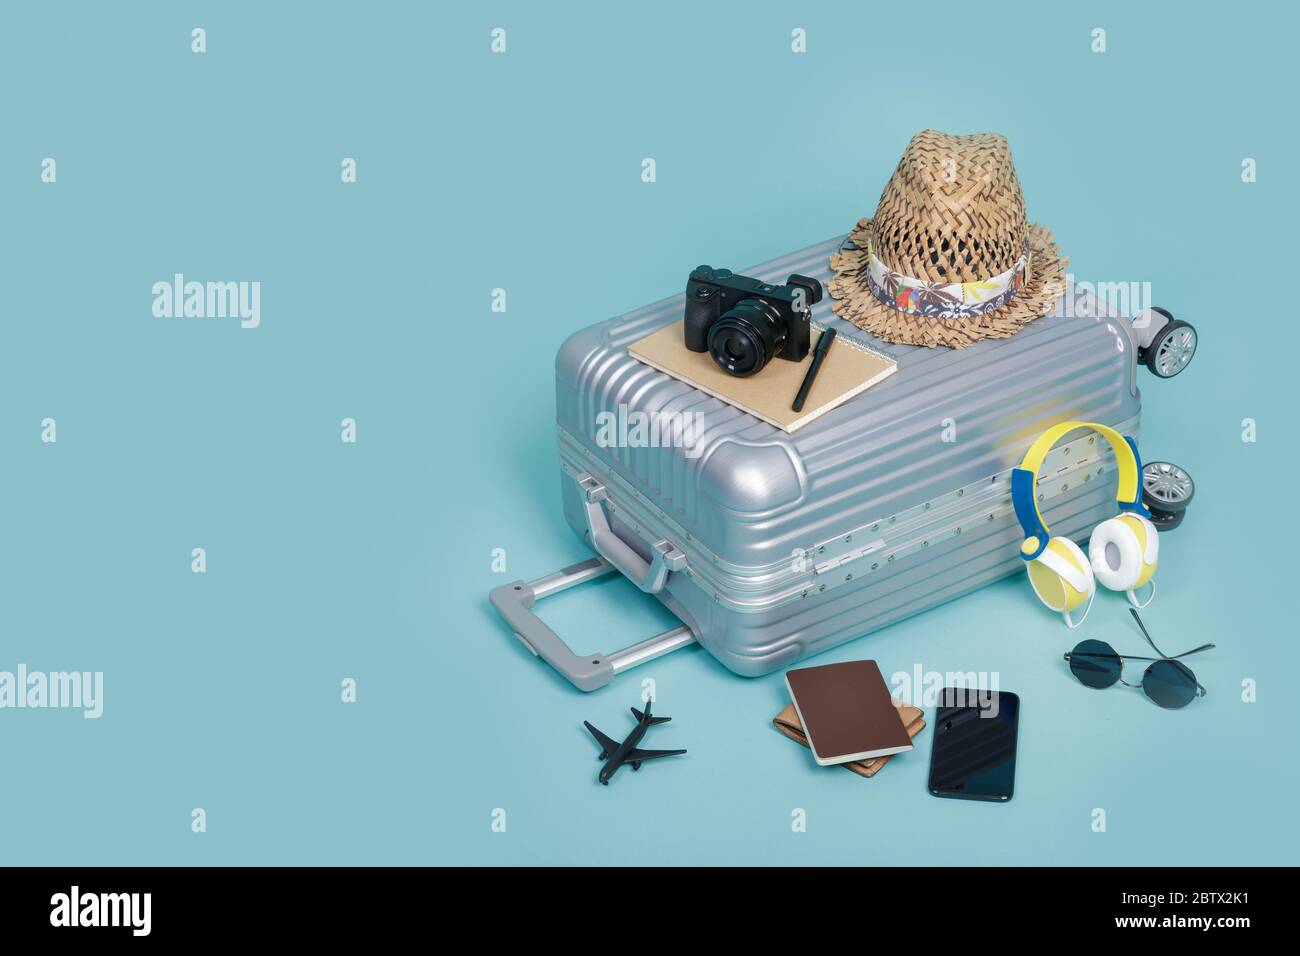 Travel Baggage with passport, camera, hat, wallet, airplane toy and smartphone isolated on blue background with copy space, Travel concept background Stock Photo